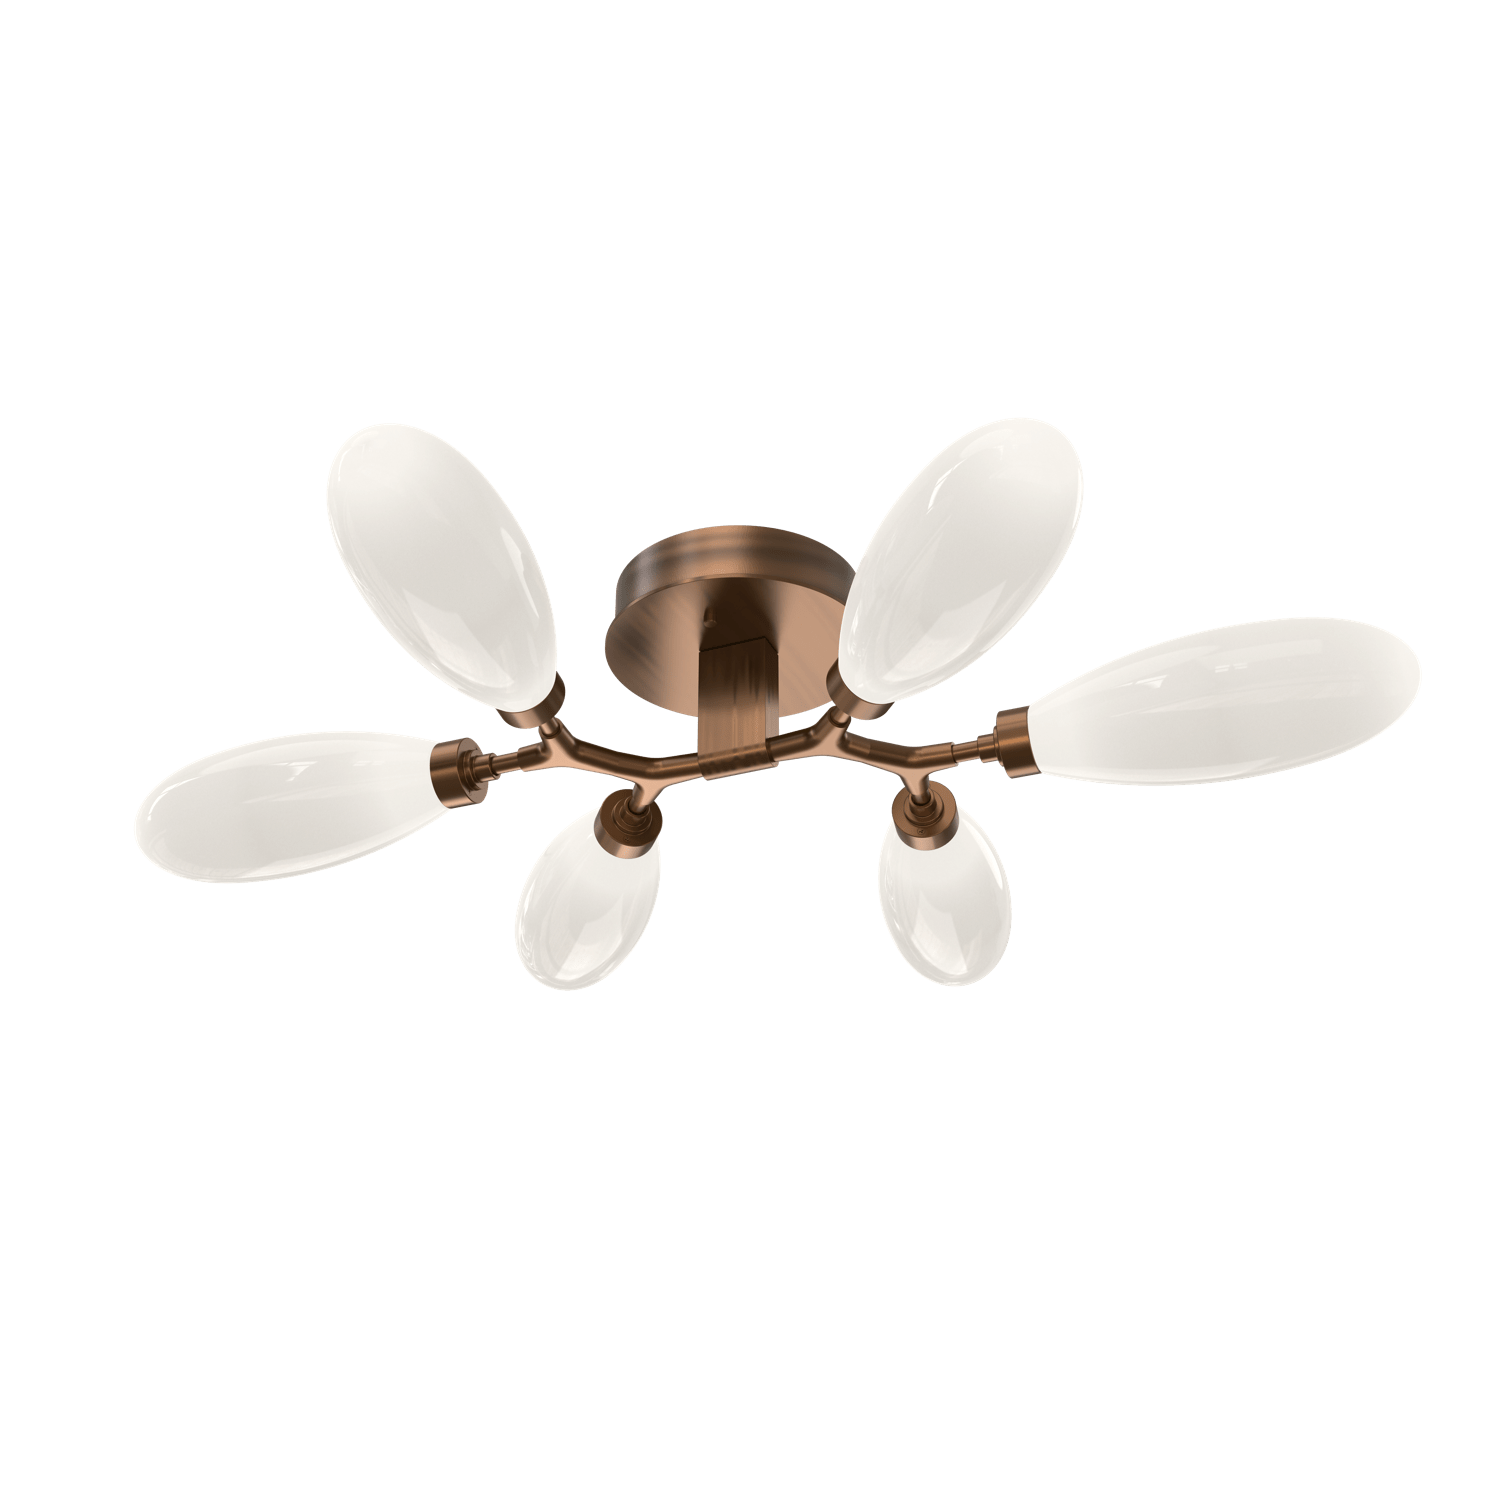 CLB0071-01-RB-WL-LL-Hammerton-Studio-Fiori-6-light-organic-flush-mount-light-with-oil-rubbed-bronze-finish-and-opal-white-glass-shades-and-LED-lamping